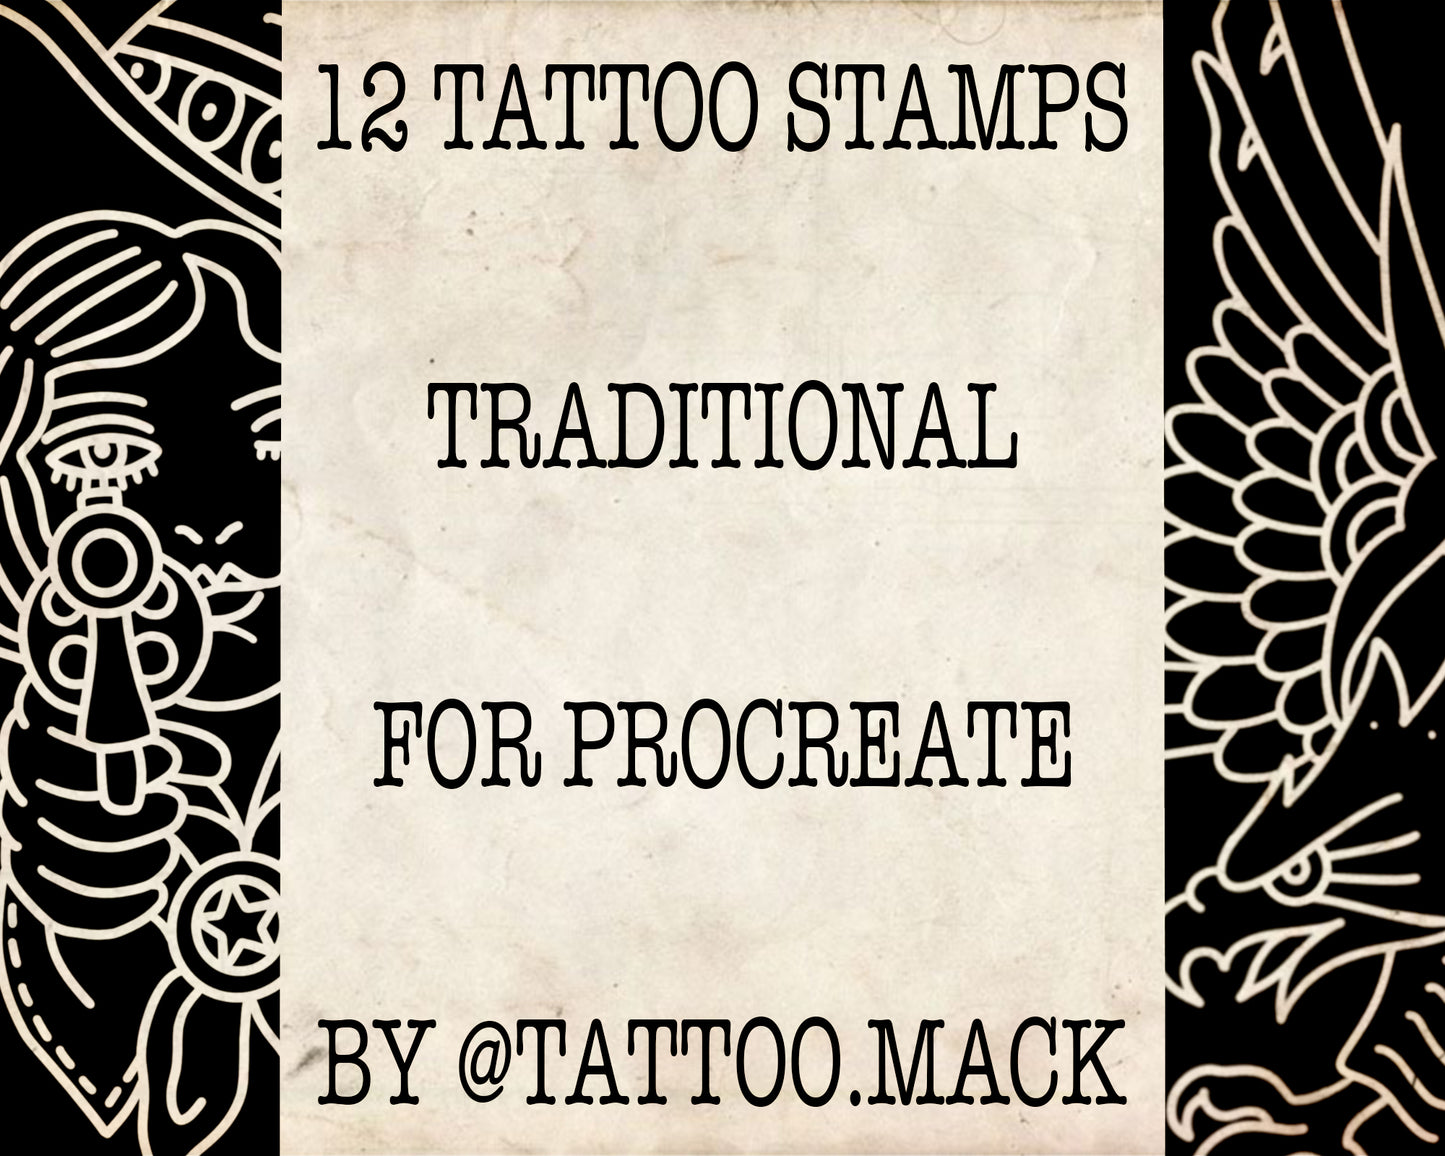 12 TRADITIONAL TATTOO STAMPS for Procreate